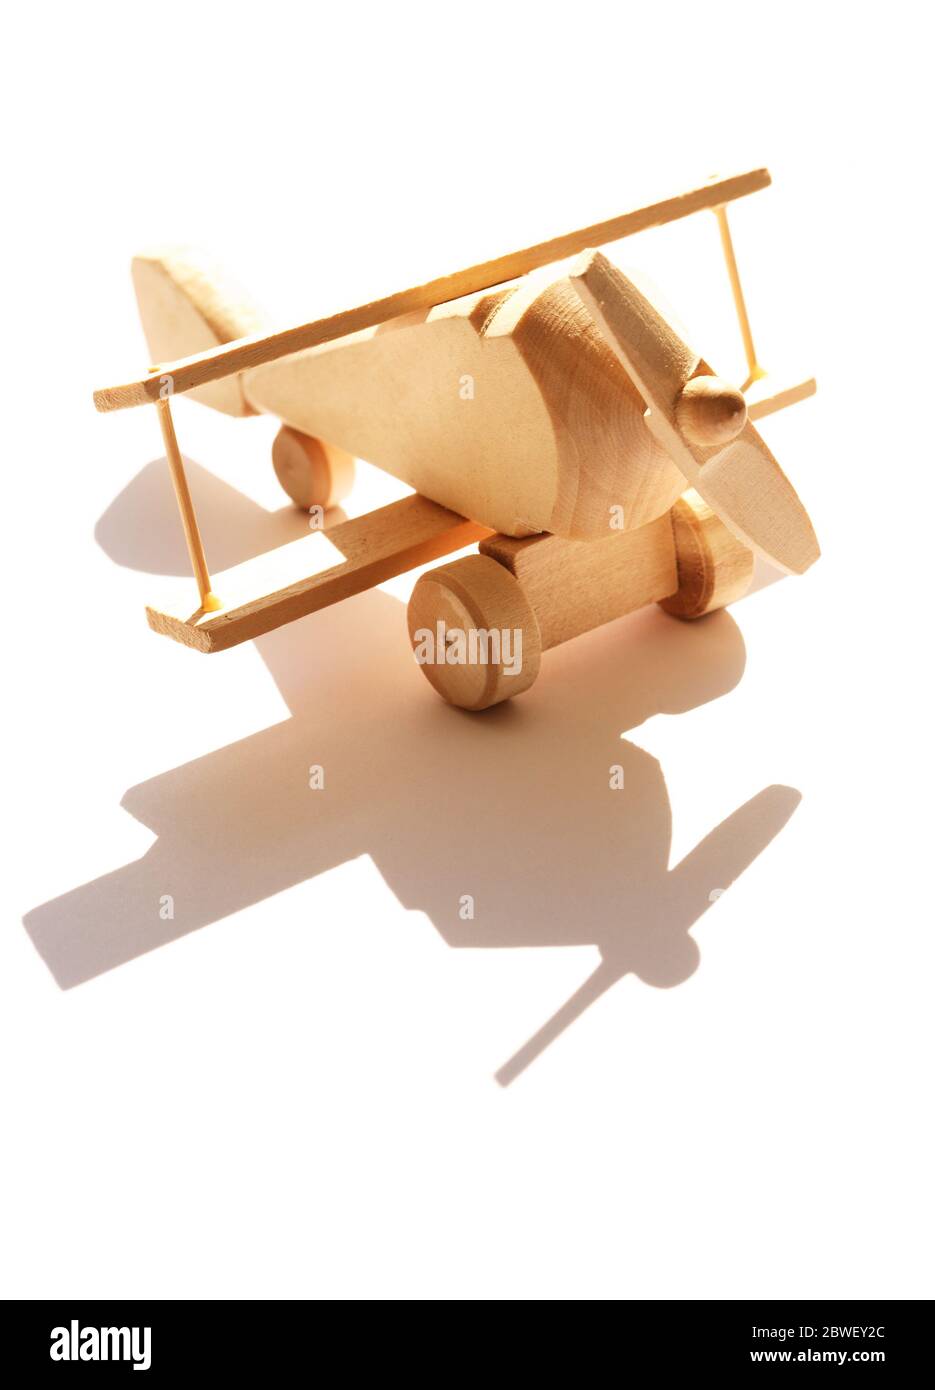 Travel concept. Small wooden airplane against sunlight with shadow Stock Photo